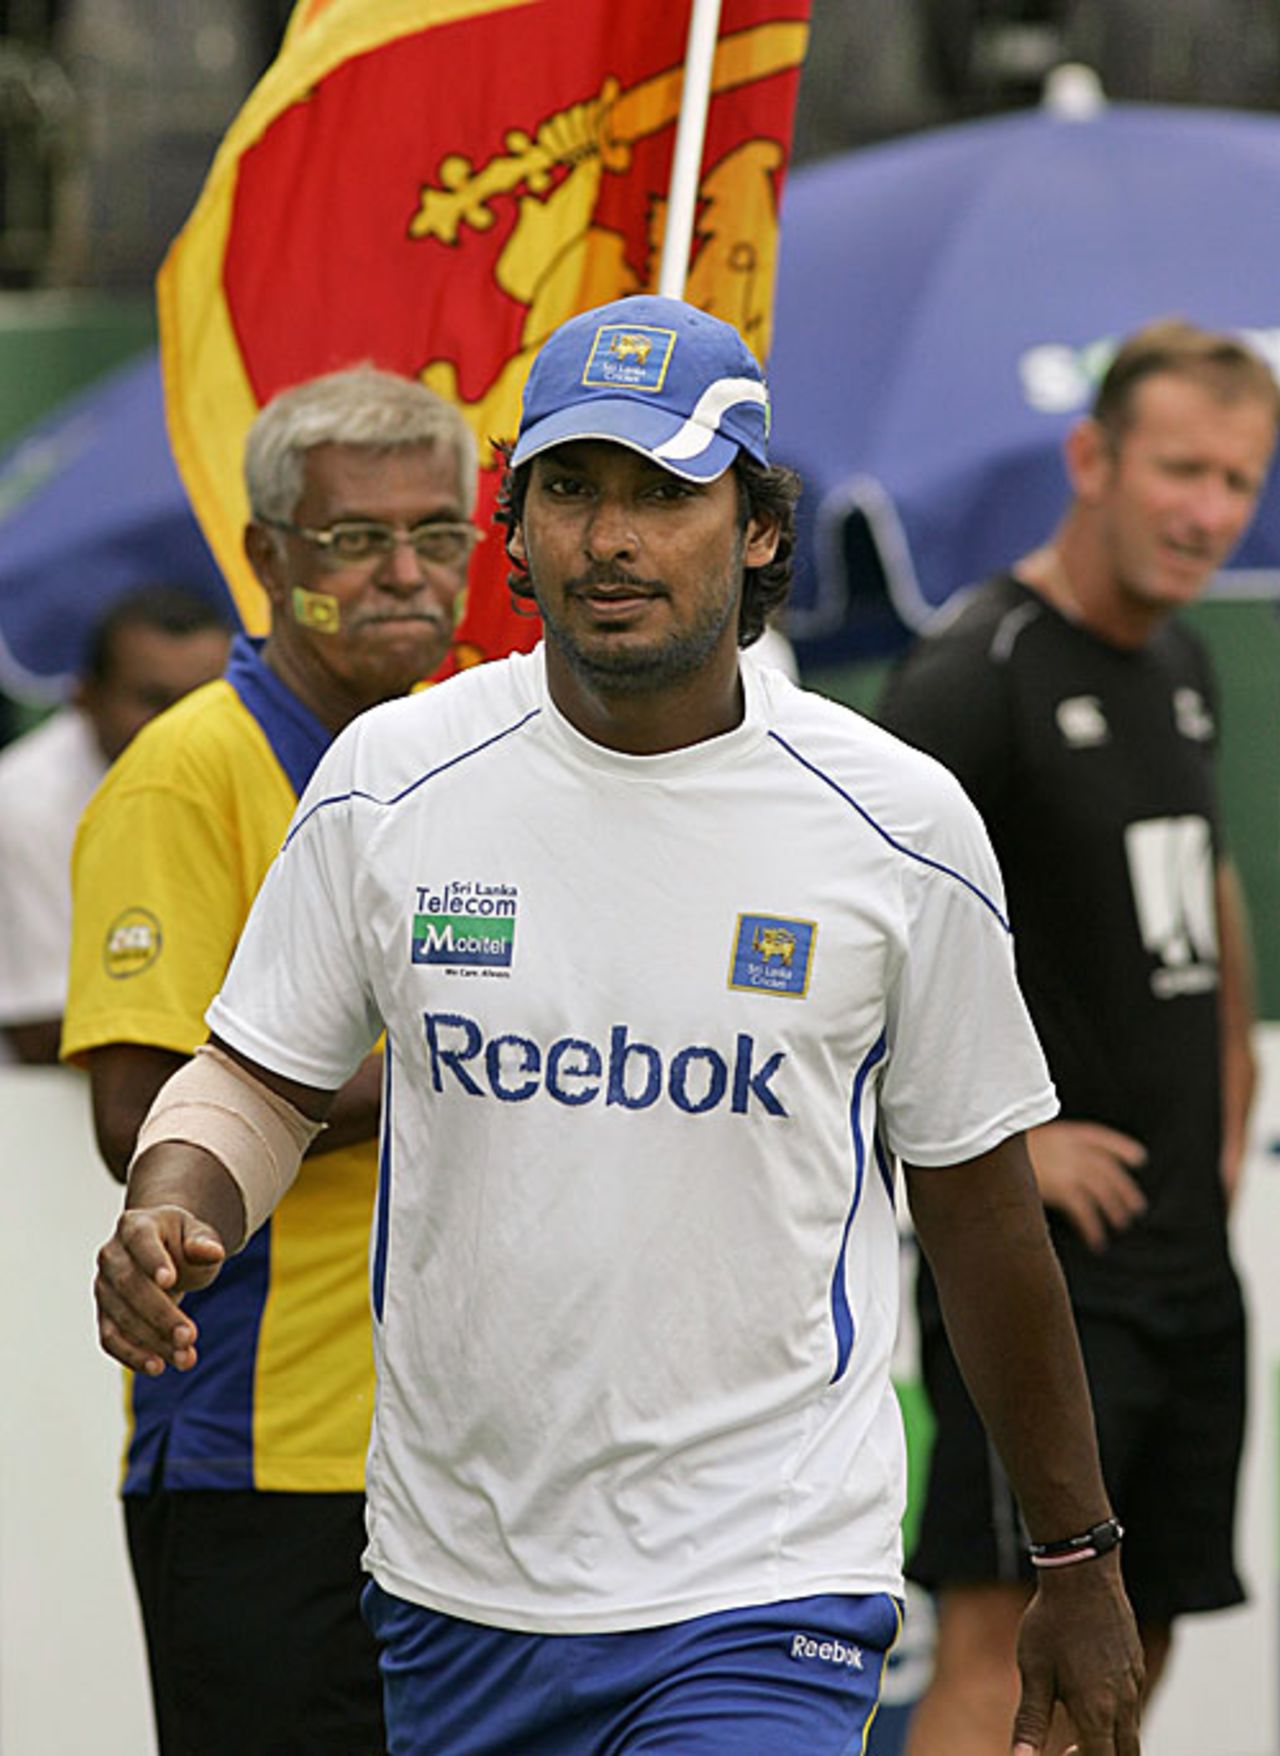 The victorious captain Kumar Sangakkara walks to pick up the series trophy, Sri Lanka v New Zealand, 2nd Test, SSC, 5th day, August 30, 2009